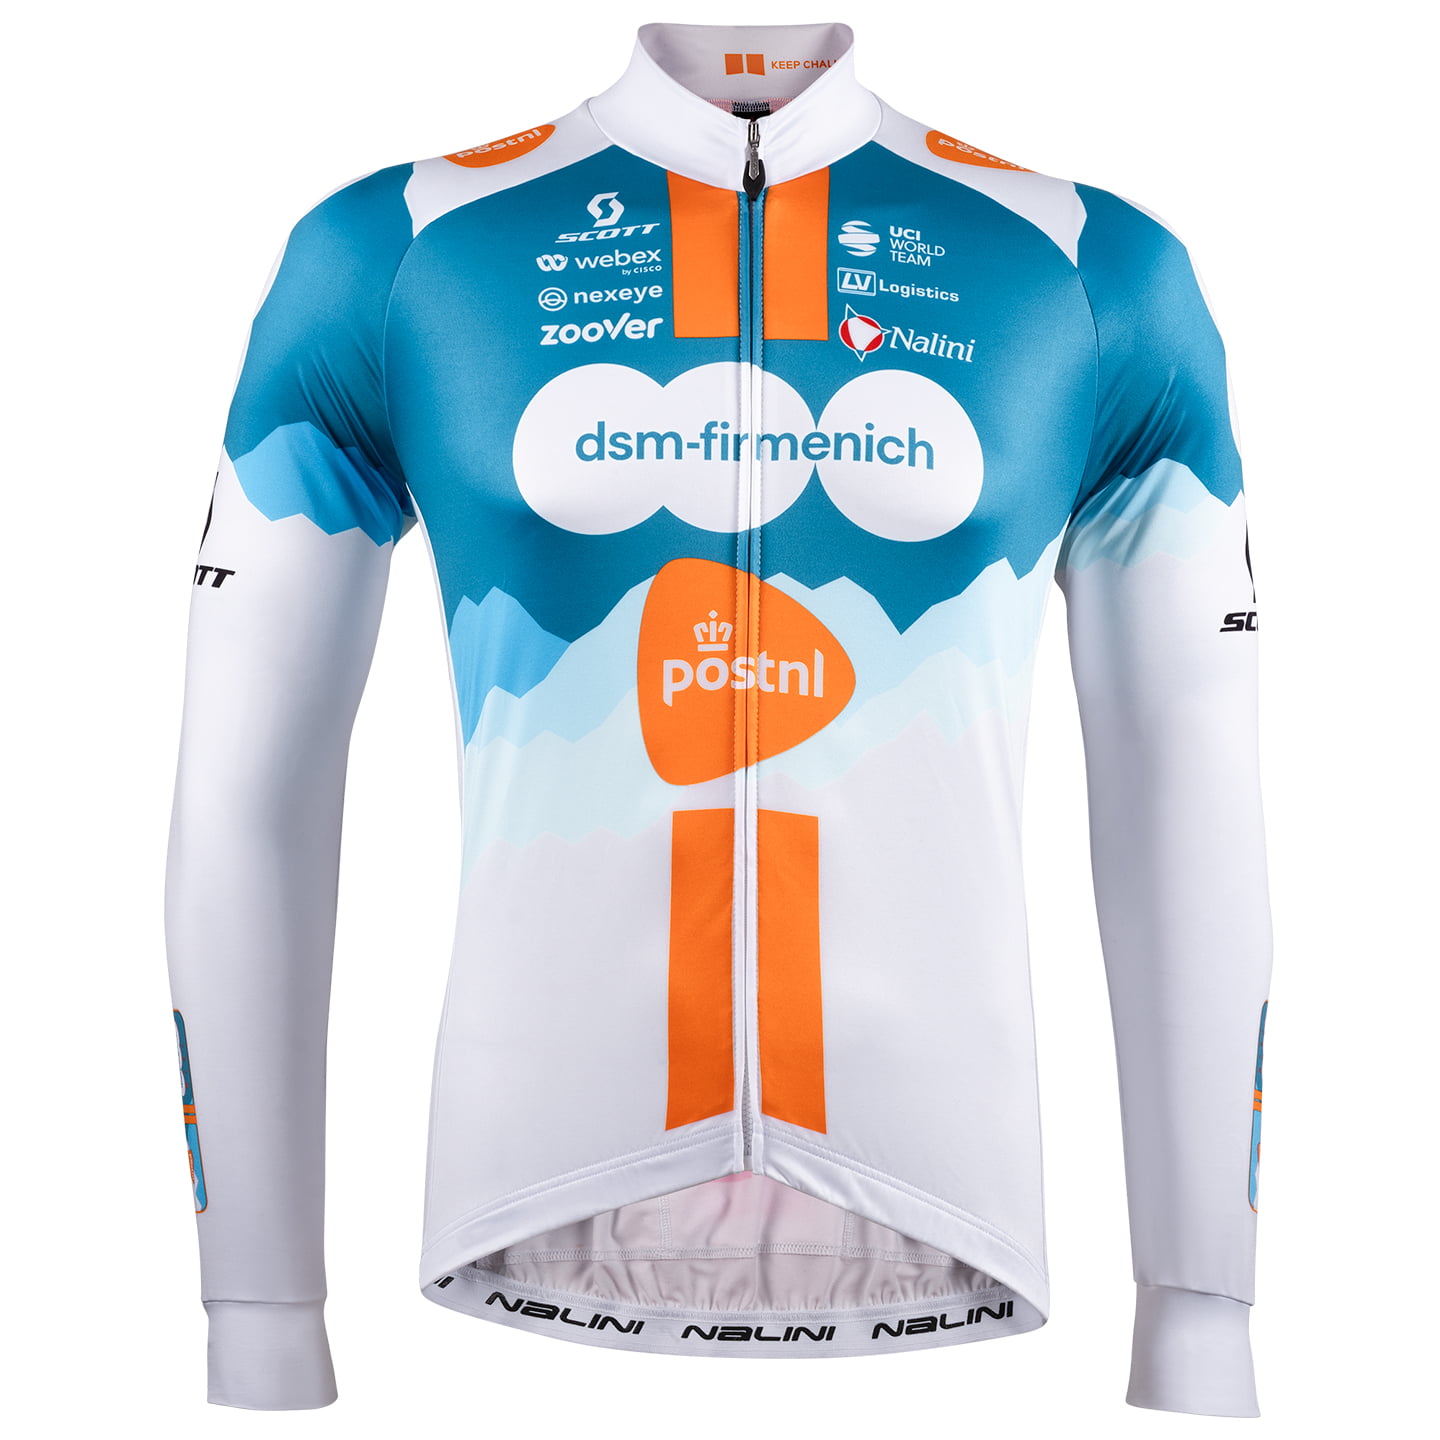 TEAM dsm-firmenich-PostNL 2024 Long Sleeve Jersey, for men, size S, Cycling jersey, Cycling clothing